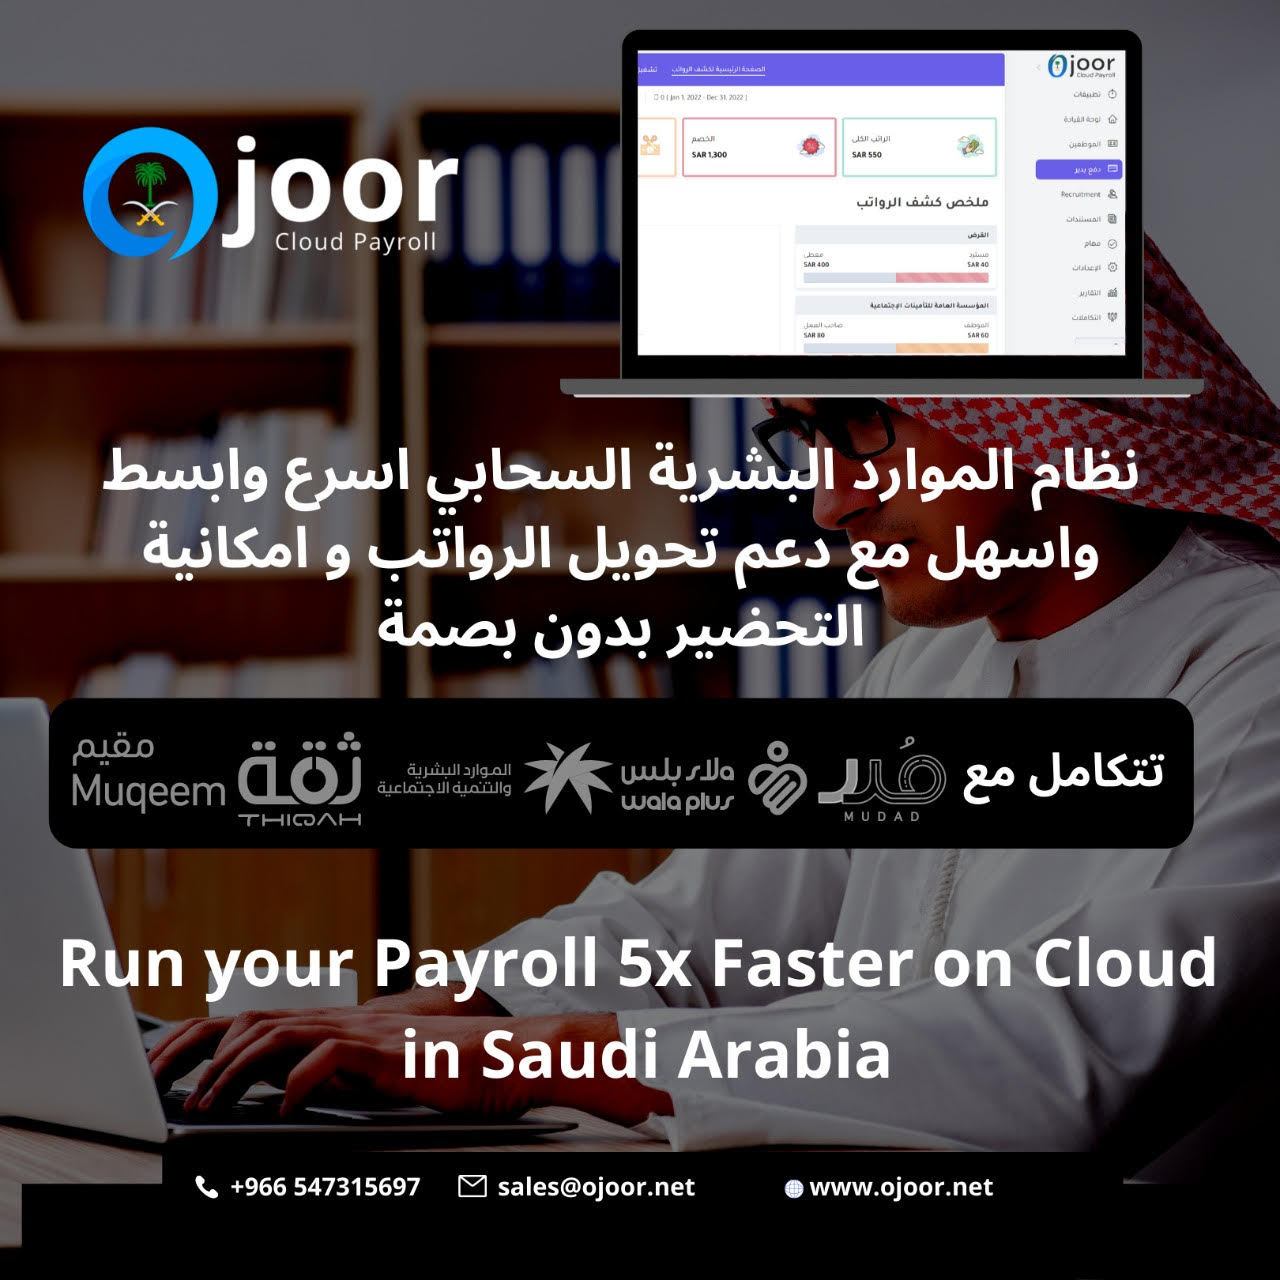 How to boost Yield along workflow in Payroll Software in Saudi?